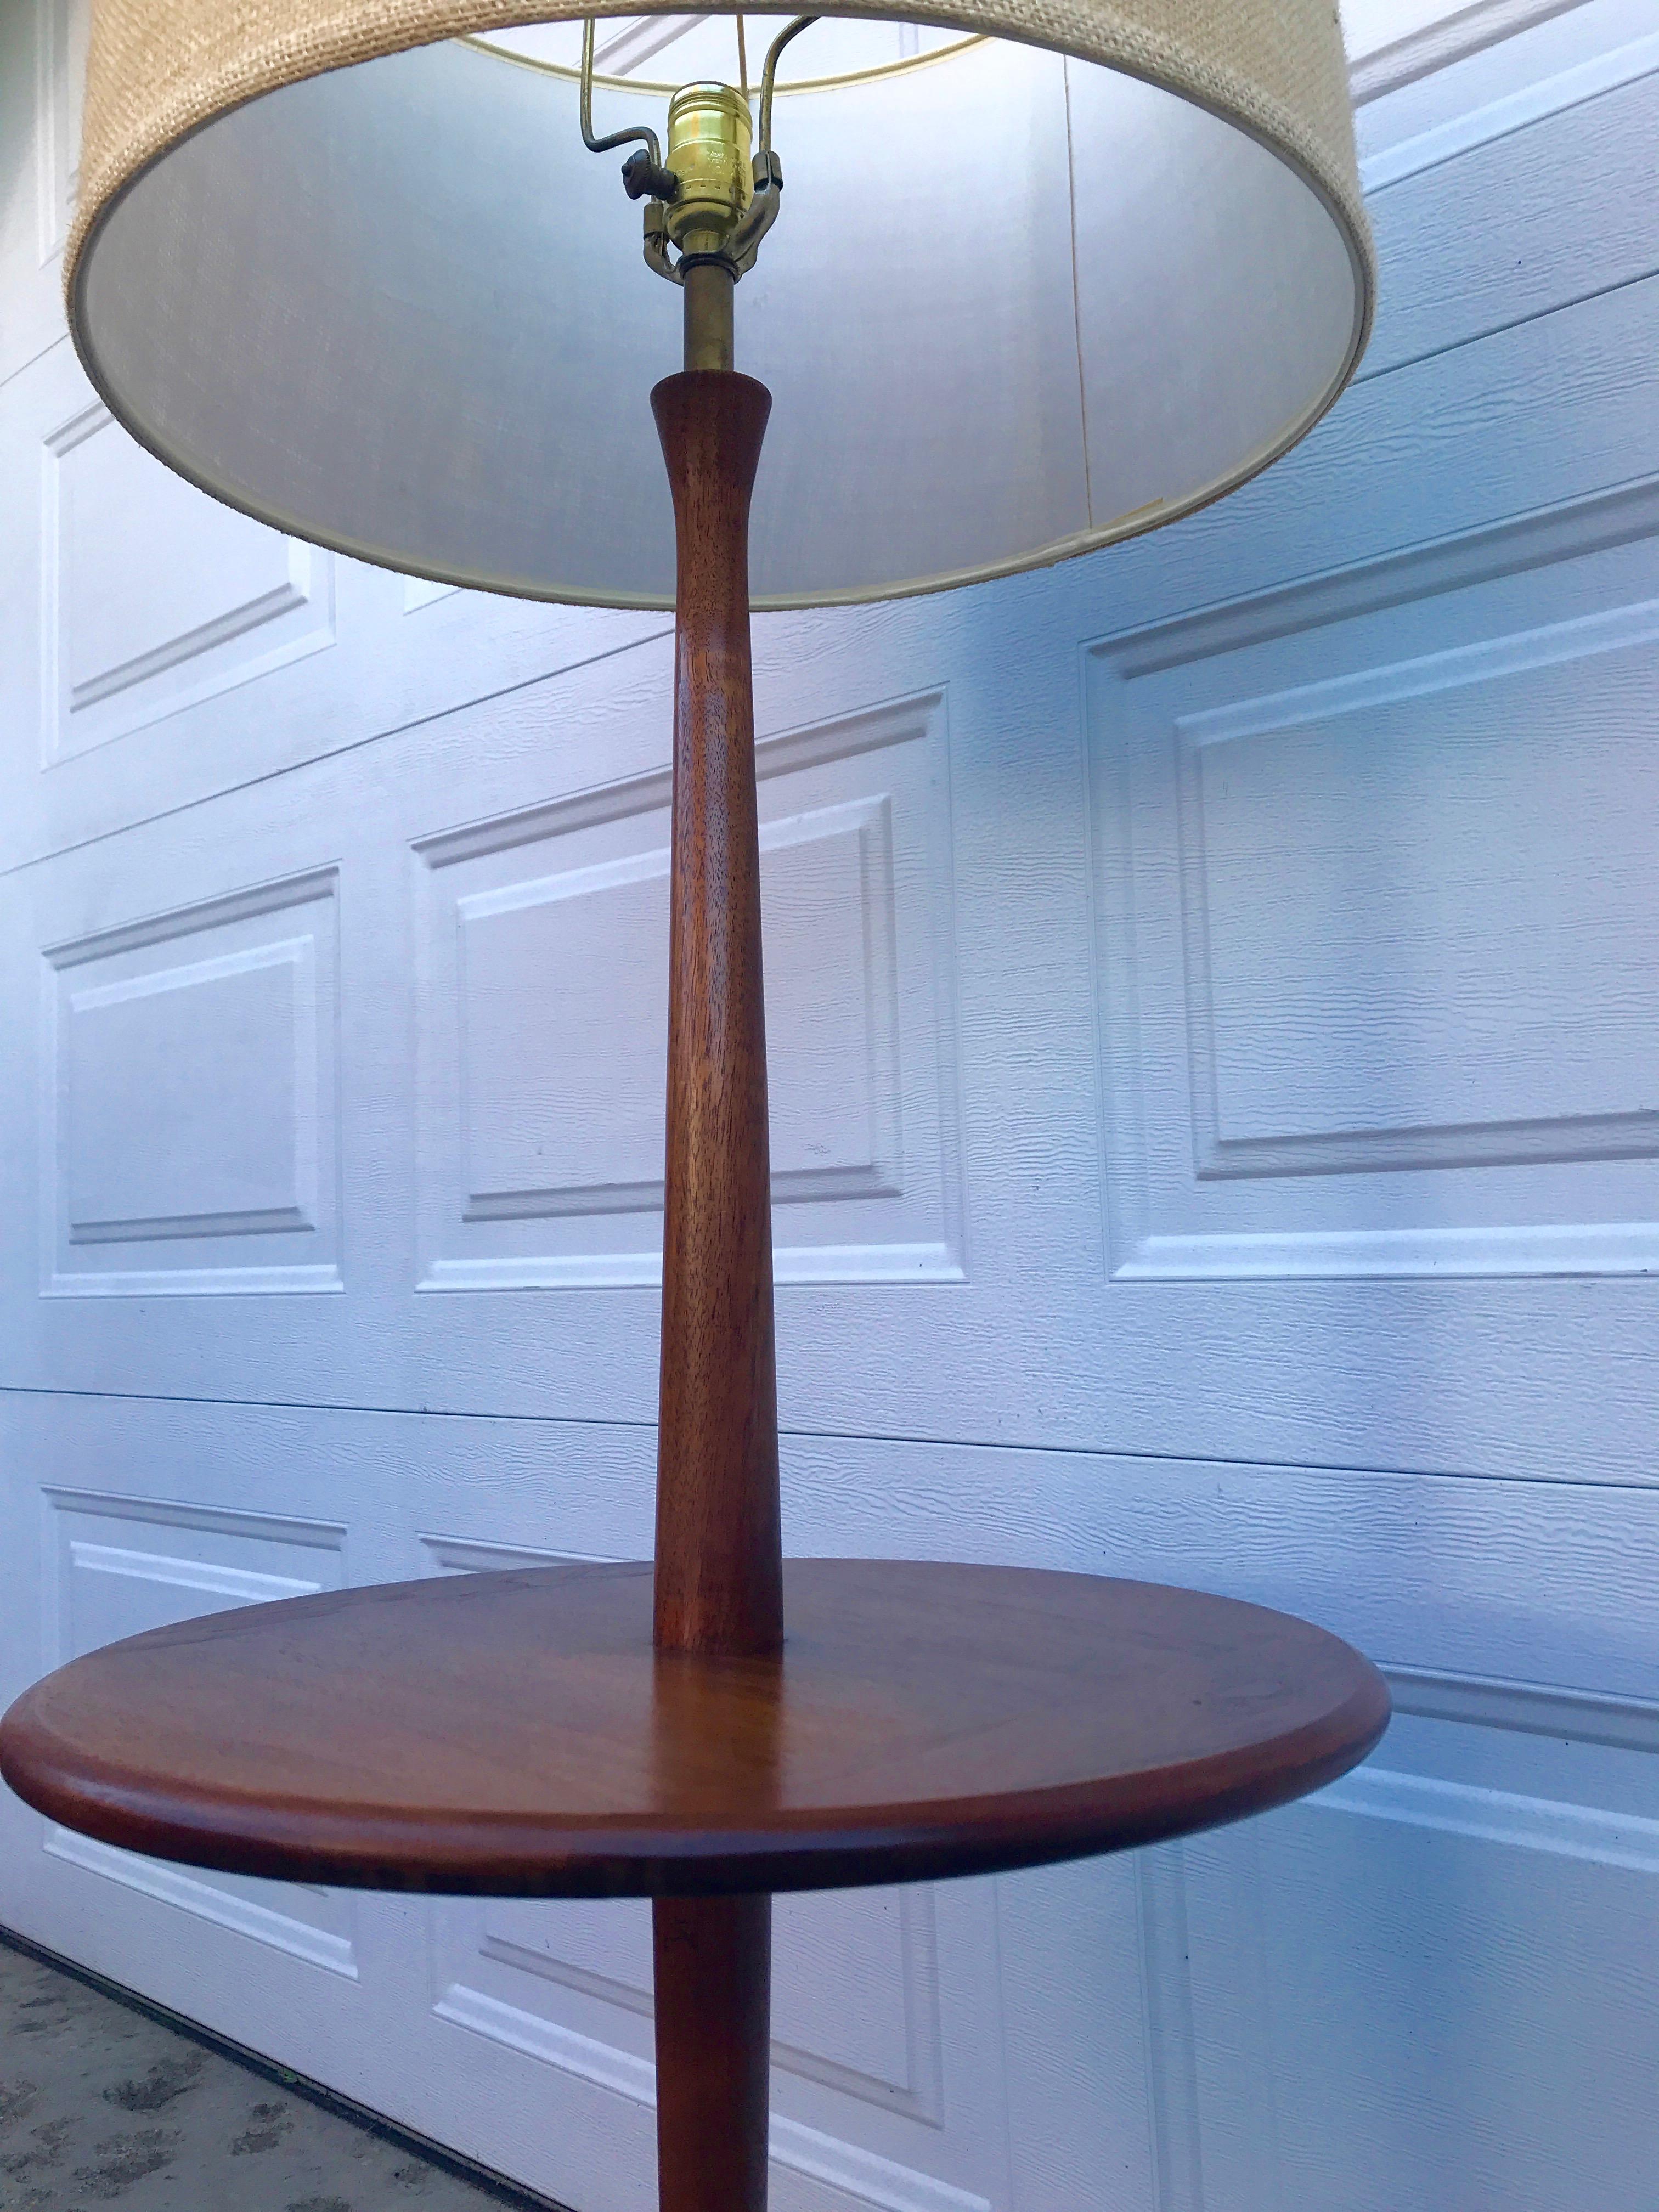 Laurel Walnut Mid-Century Modern Floor Lamp with Table, circa 1960s In Good Condition For Sale In Billerica, MA